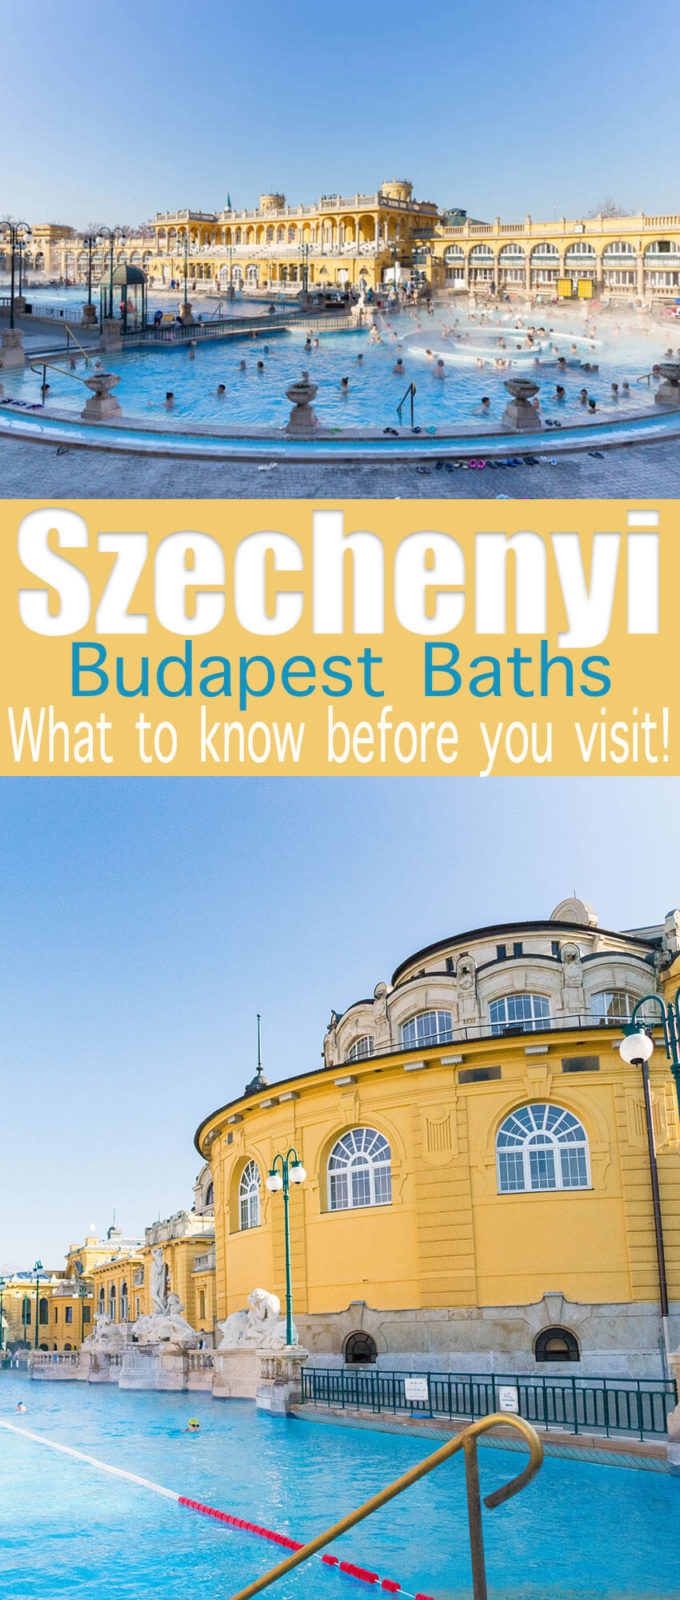 What to know before visiting the Szechenyi baths in Budapest